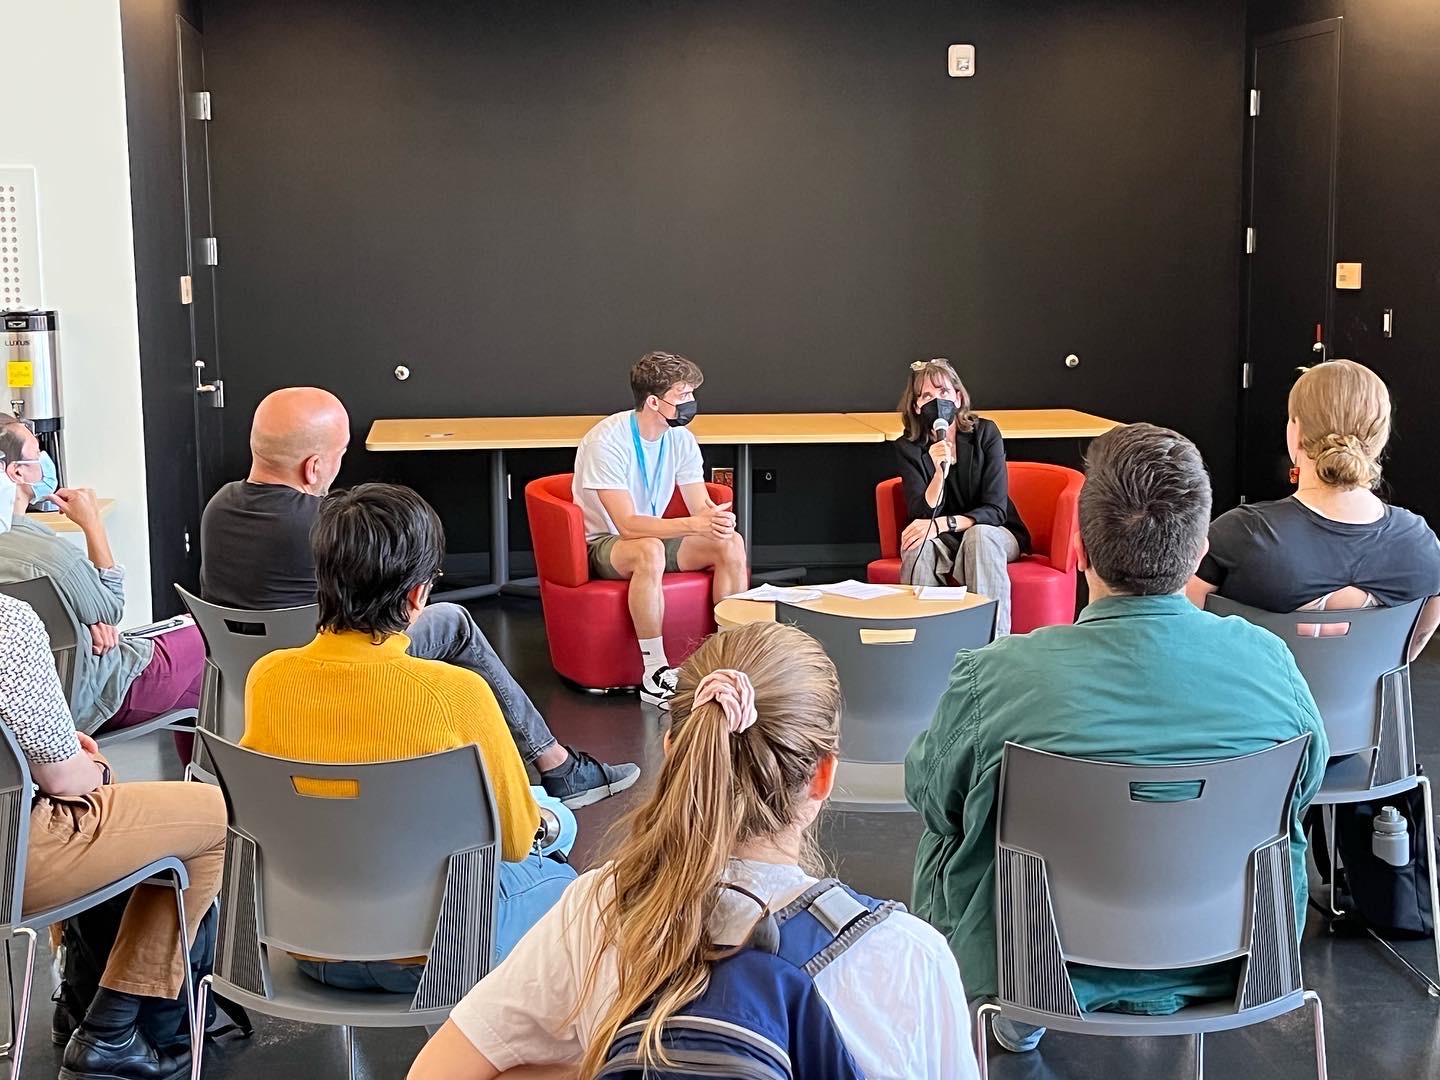 This photo is of Sonia Furstenau and Liam Mackay sitting at the front of an audience. They are engaged in conversation, sitting in two red chairs as people listen from the audience.